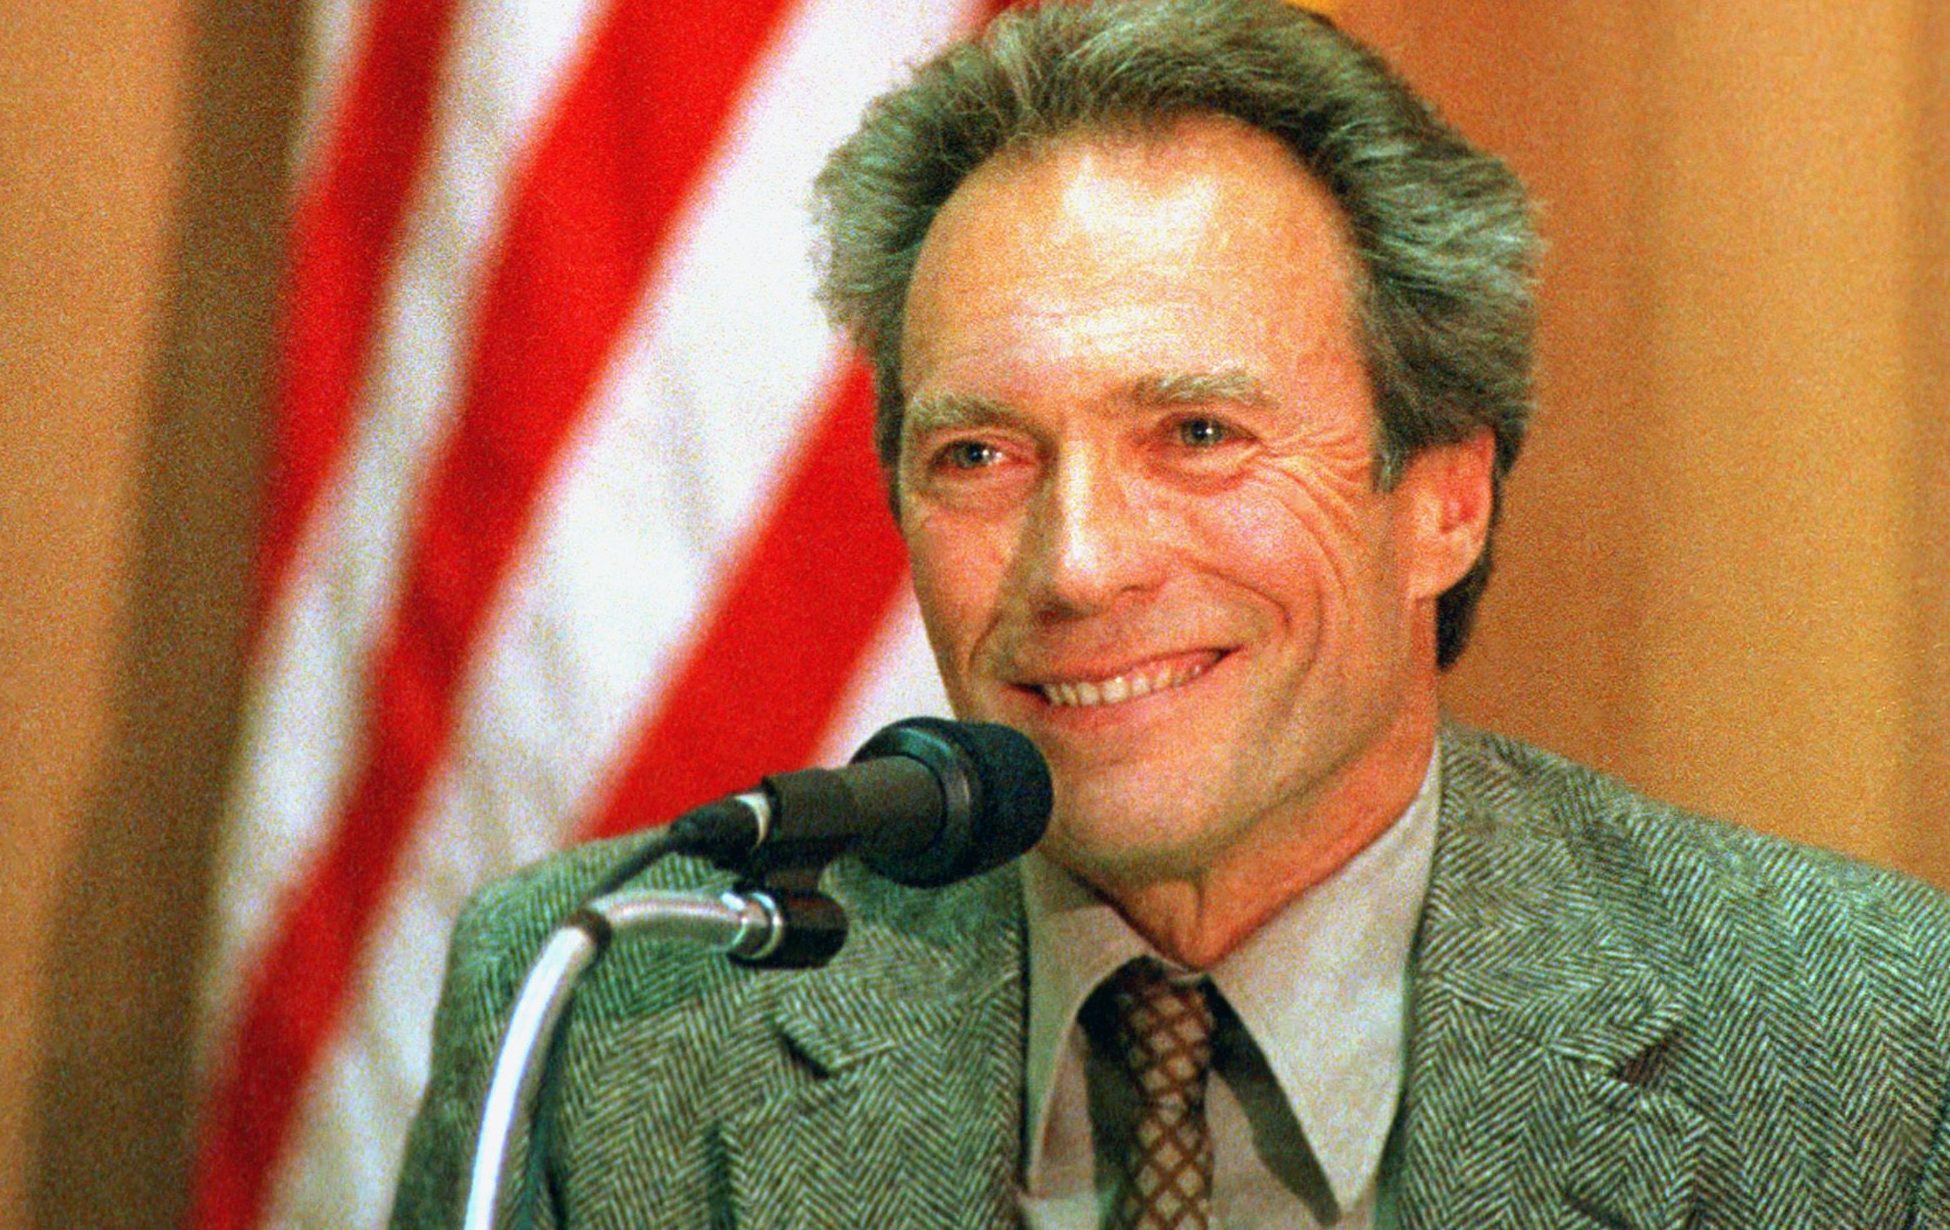 Actor Clint Eastwood during his first city council meeting as mayor